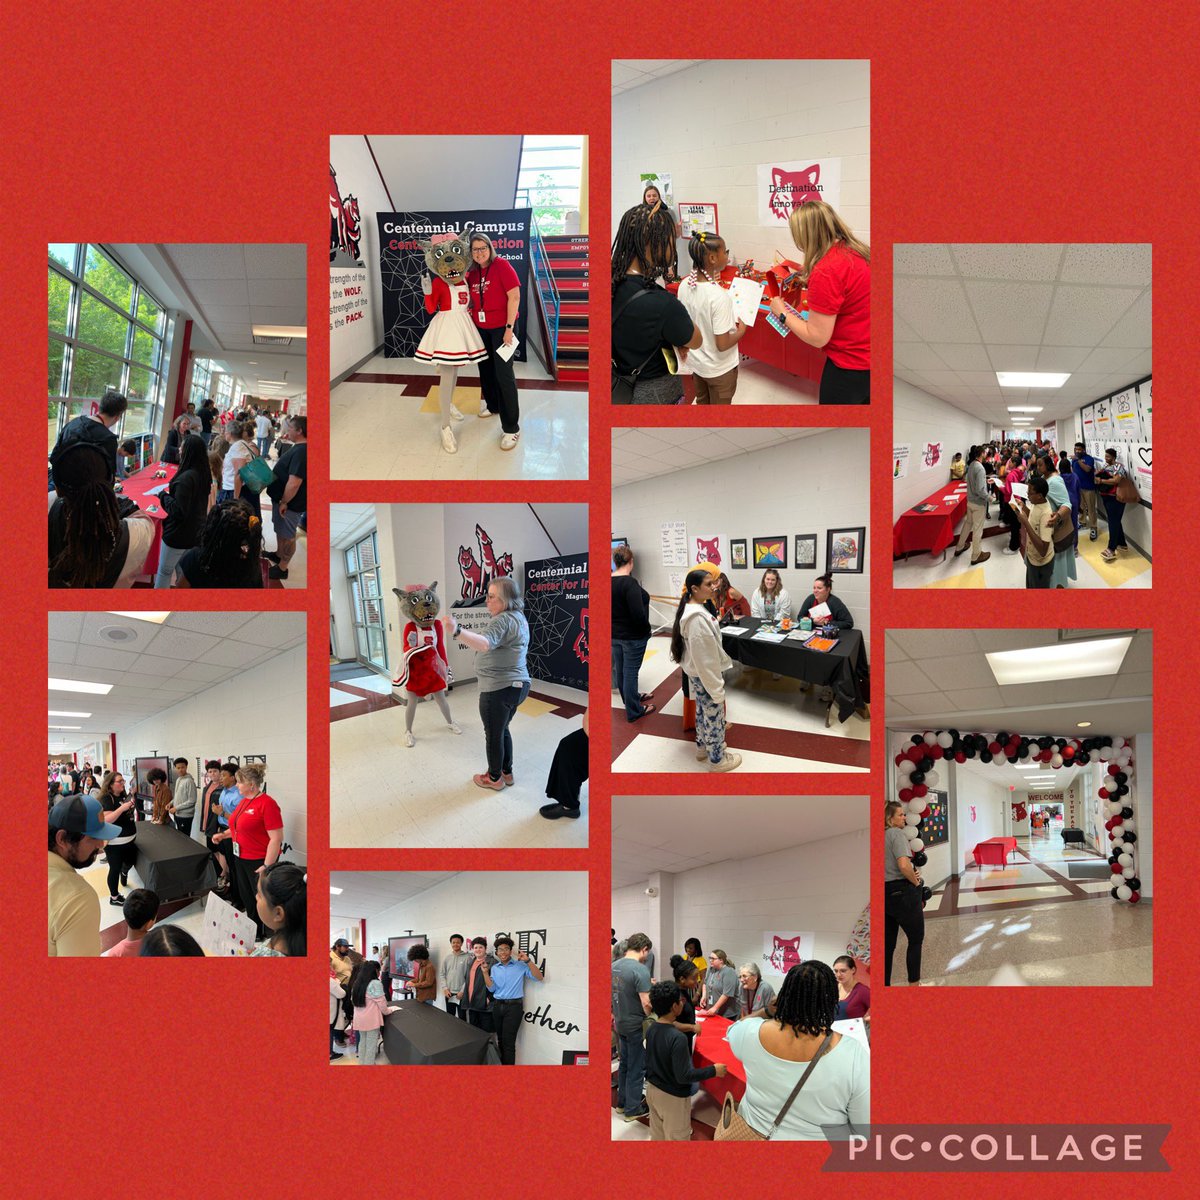 What a fun evening welcoming our newest Red Wolves. Meeting families and connecting is the first step to a successful middle school experience. We are so glad to welcome so many. #centennovators #OurDen @CCMMSRedwolves